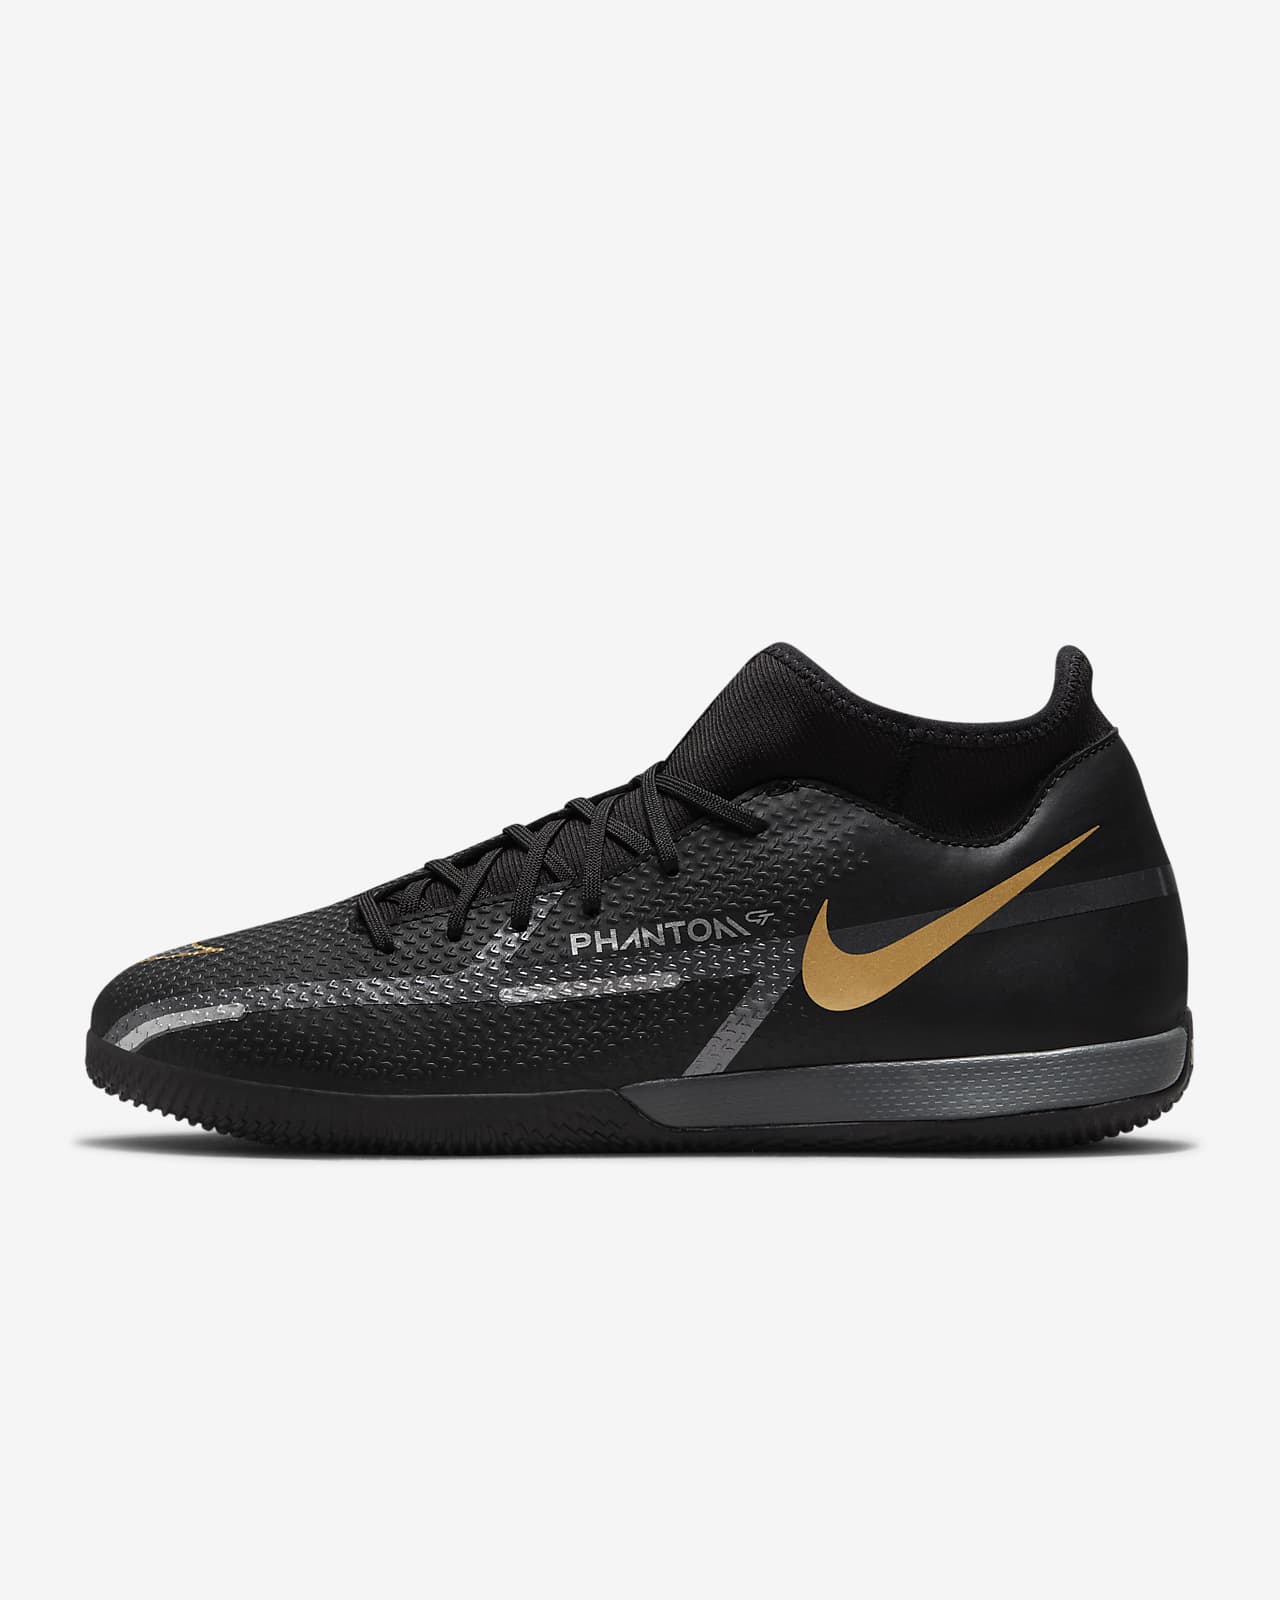 Nike Phantom GT2 Academy Dynamic Fit IC Indoor/Court Soccer Shoes